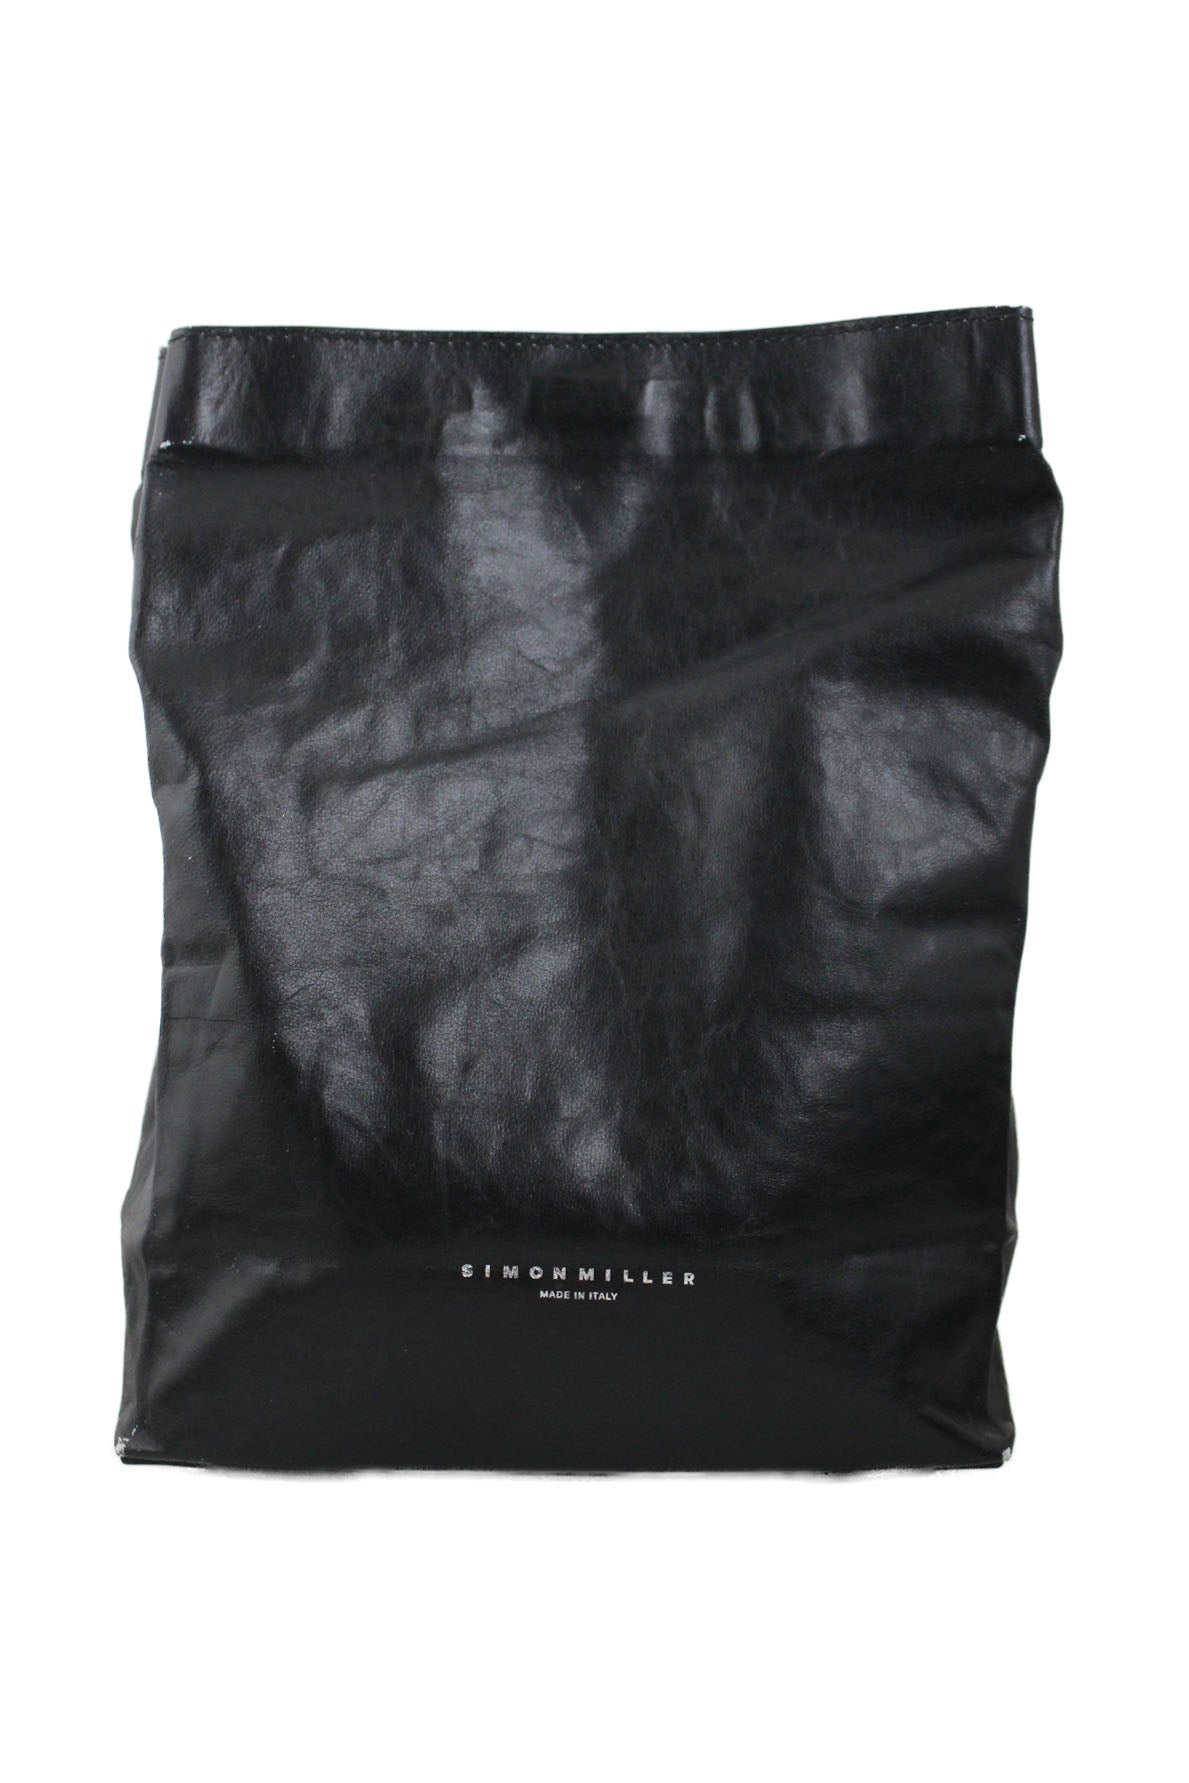 front of simon miller black lunch bag. features embossed silver-toned logo brand, gusseted bottom, and magnetic top closure.